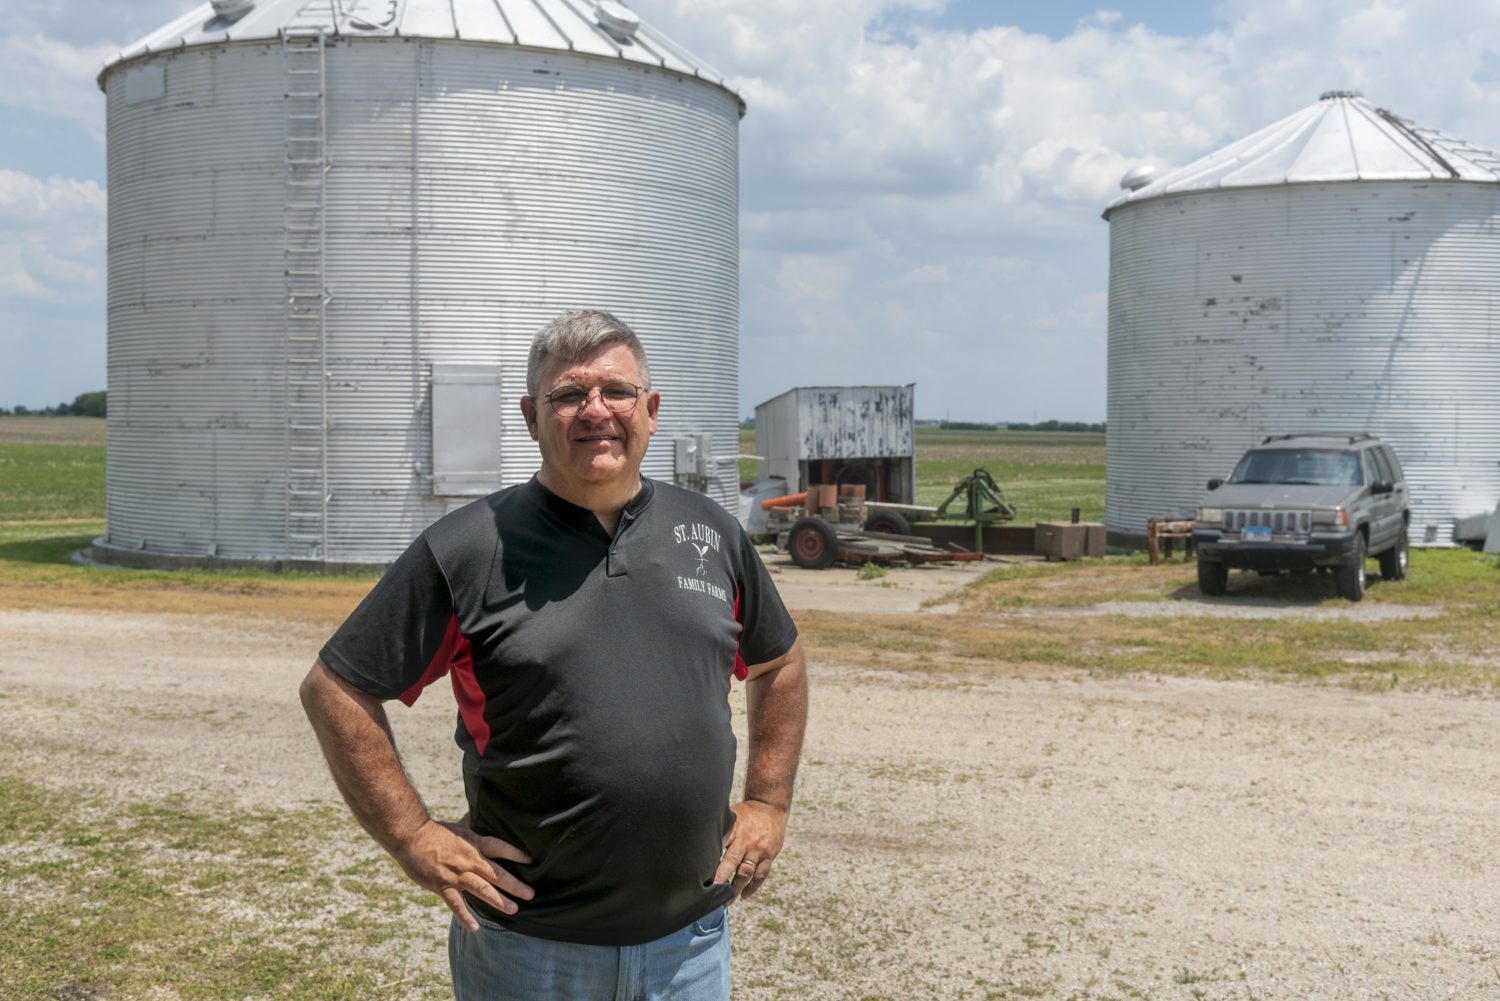 St. Albin stands, hands on hips, in front of two large silos on his Illinois farm. July 2020